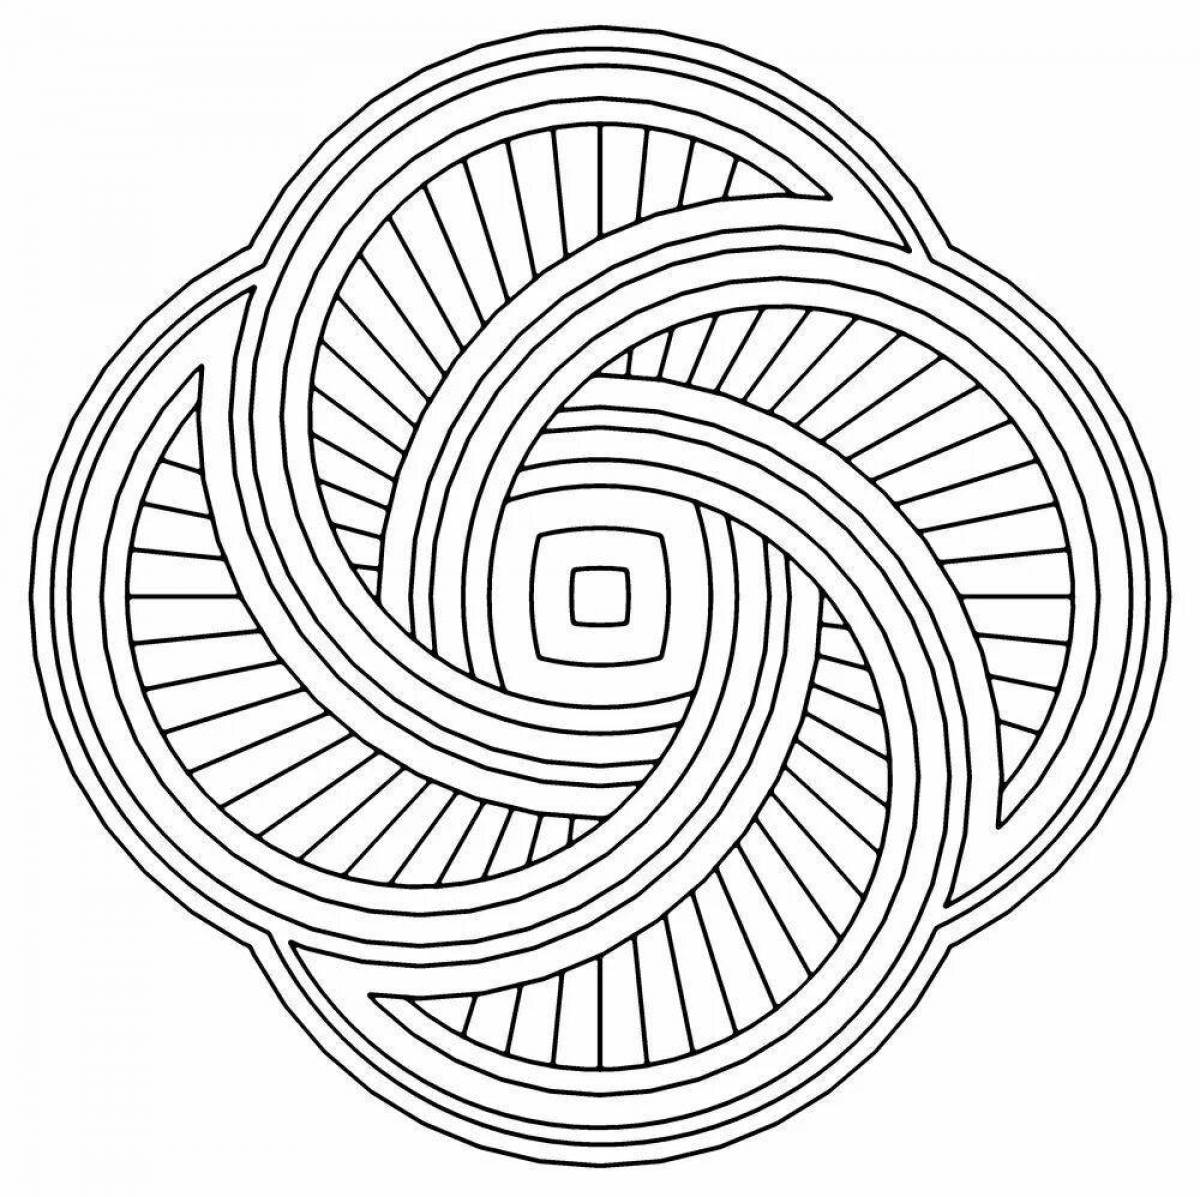 Adorable round lines create coloring pages